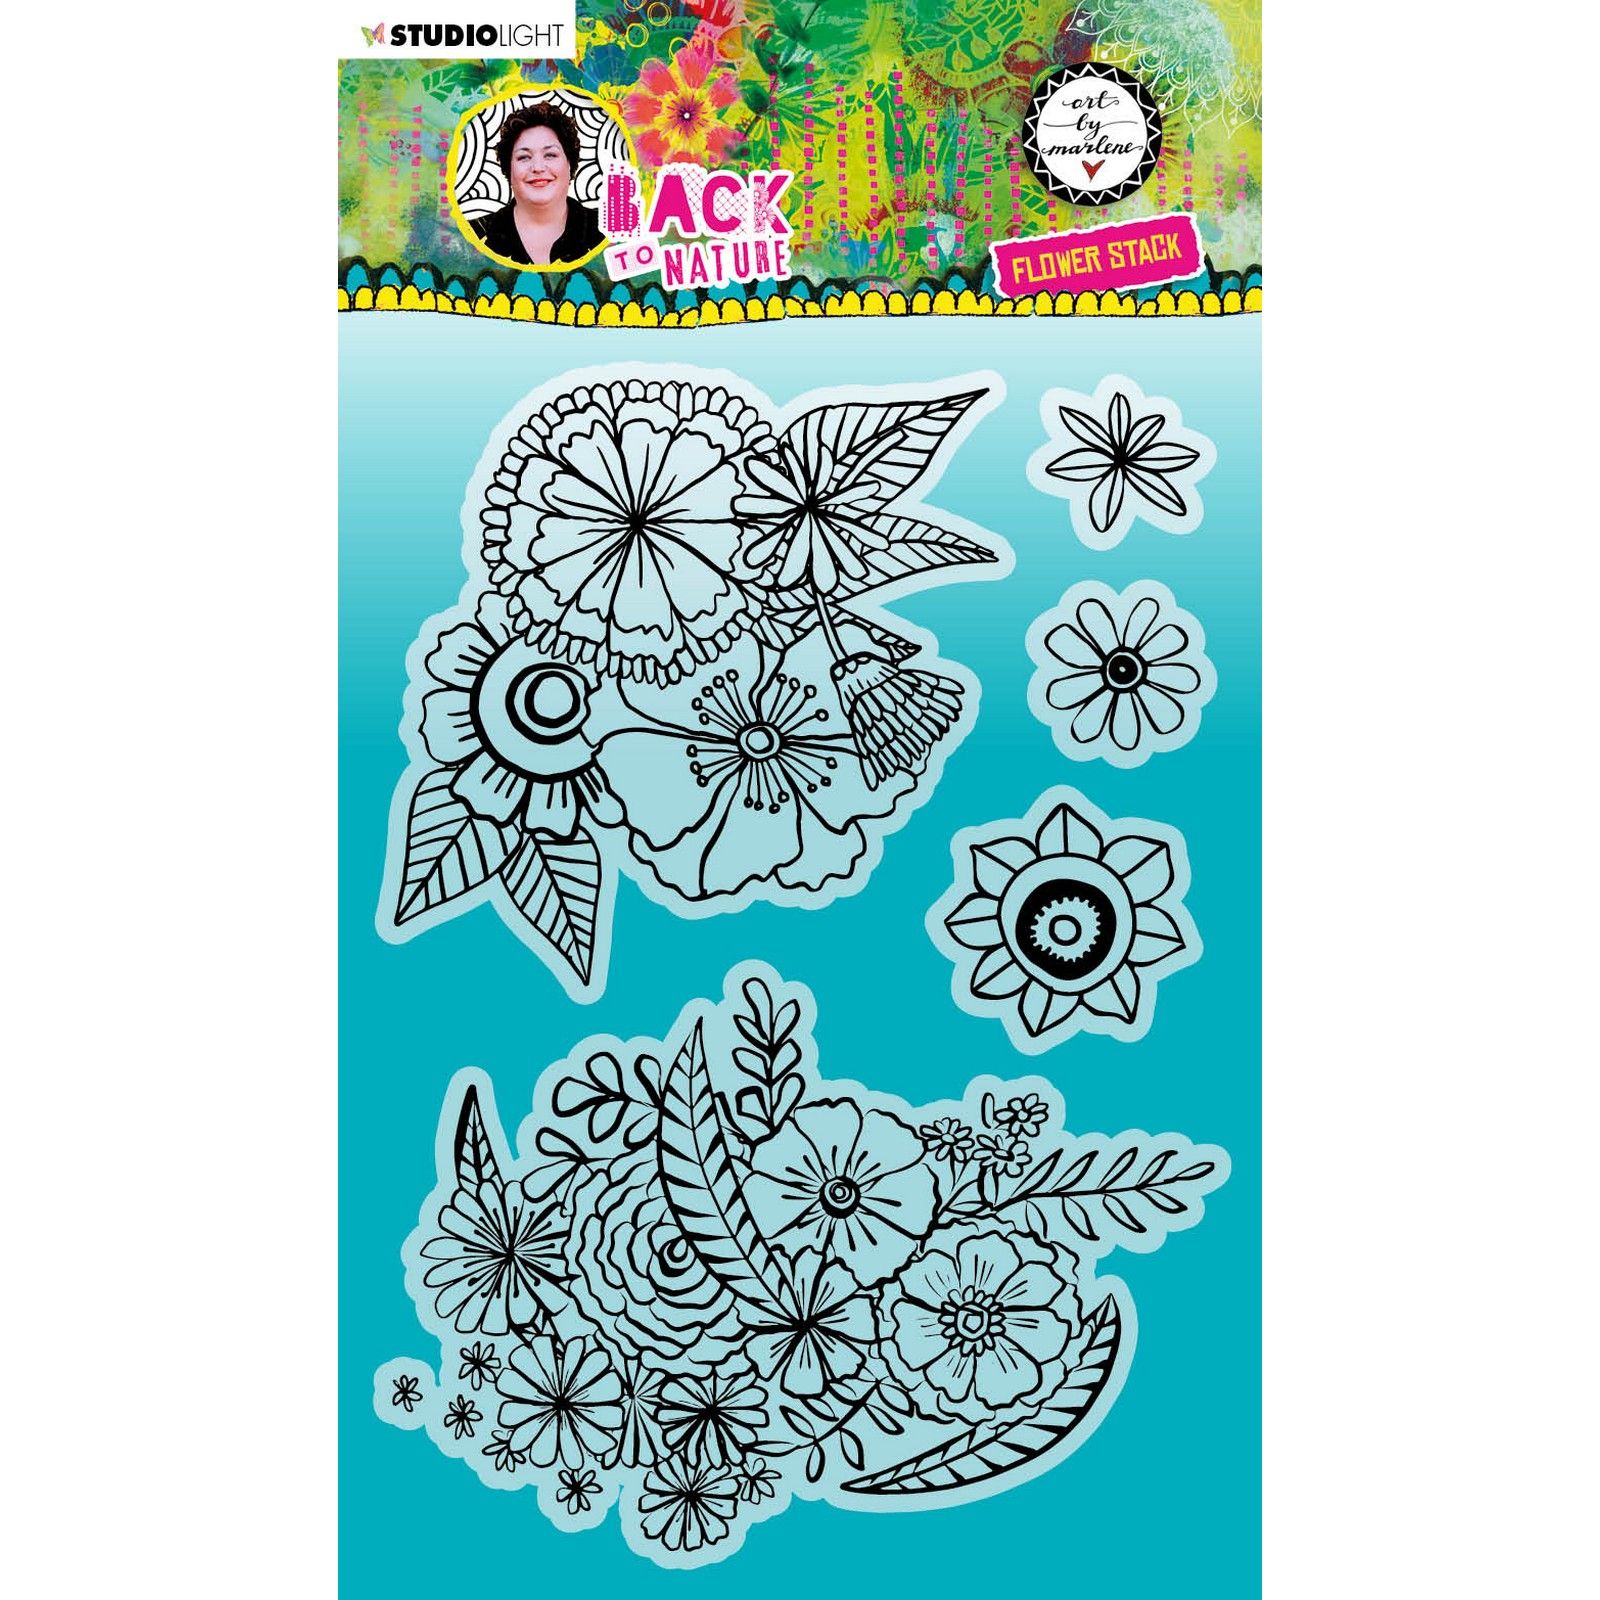 Studio Light • Back to Nature Clear Stamp Flower Stack